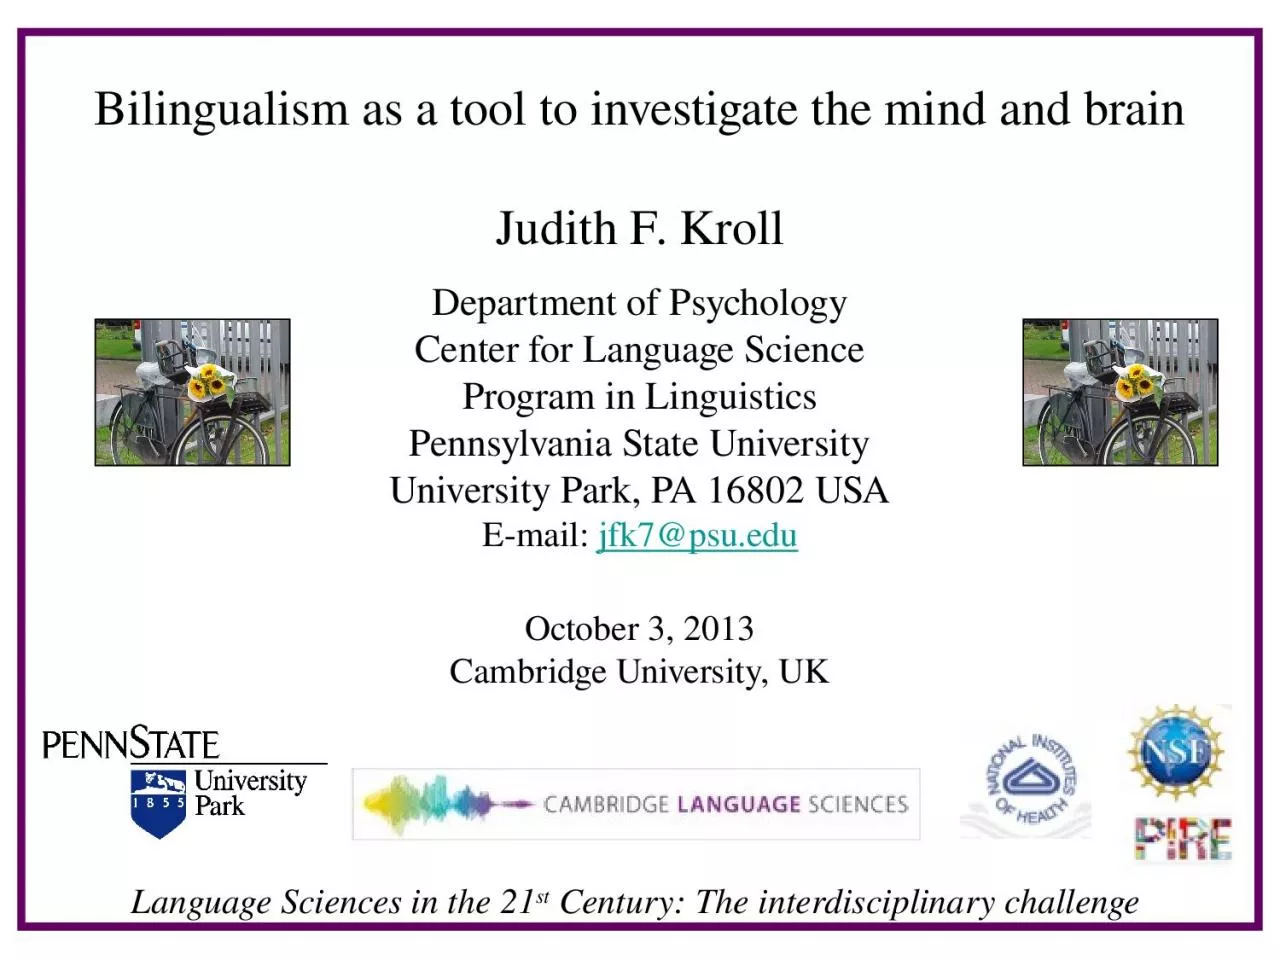 Bilingualism as a tool to investigate the mind and brain